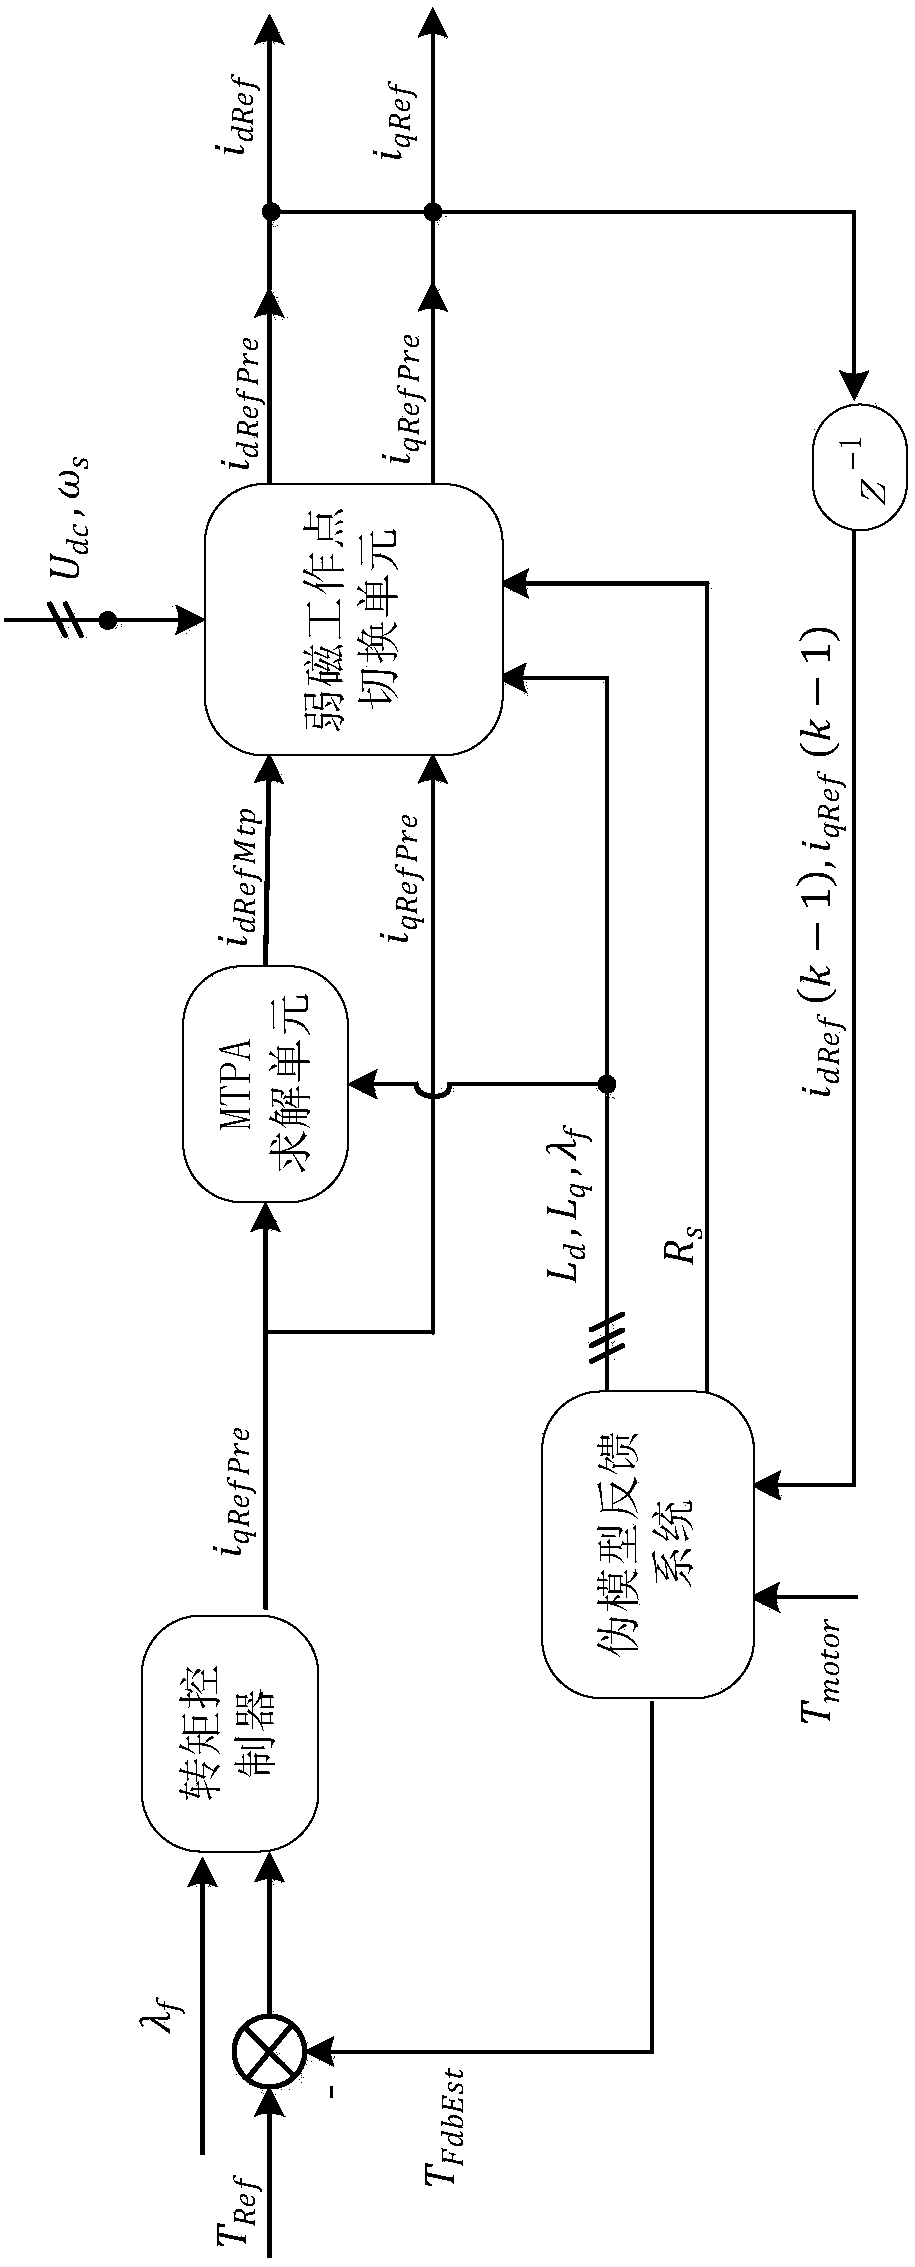 Current working point giving system and method for permanent magnet alternating-current motor